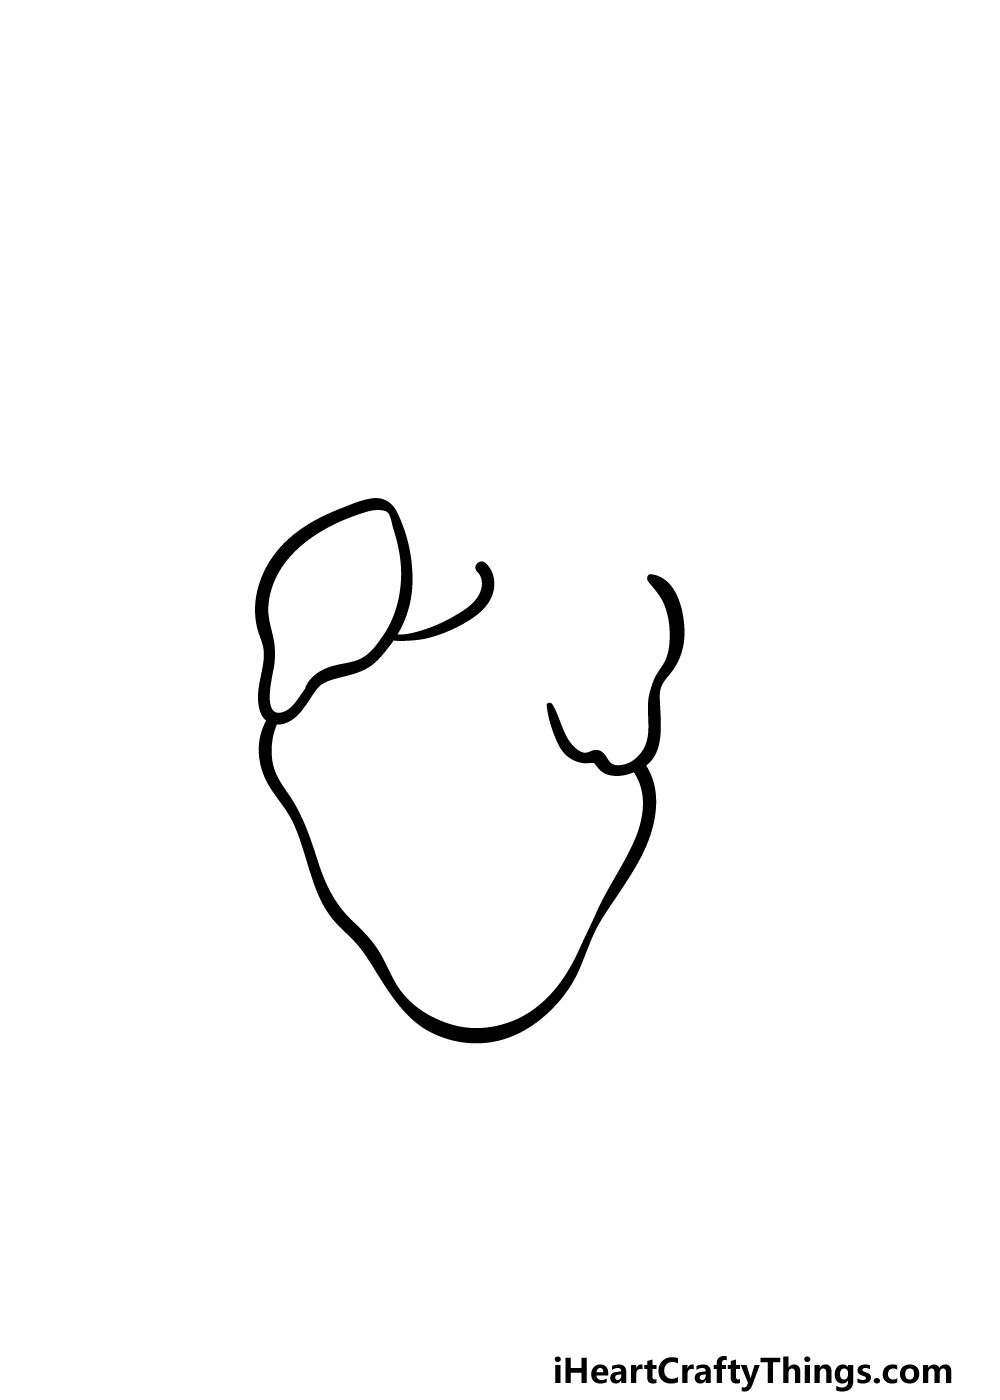 how to draw a realistic heart step 2